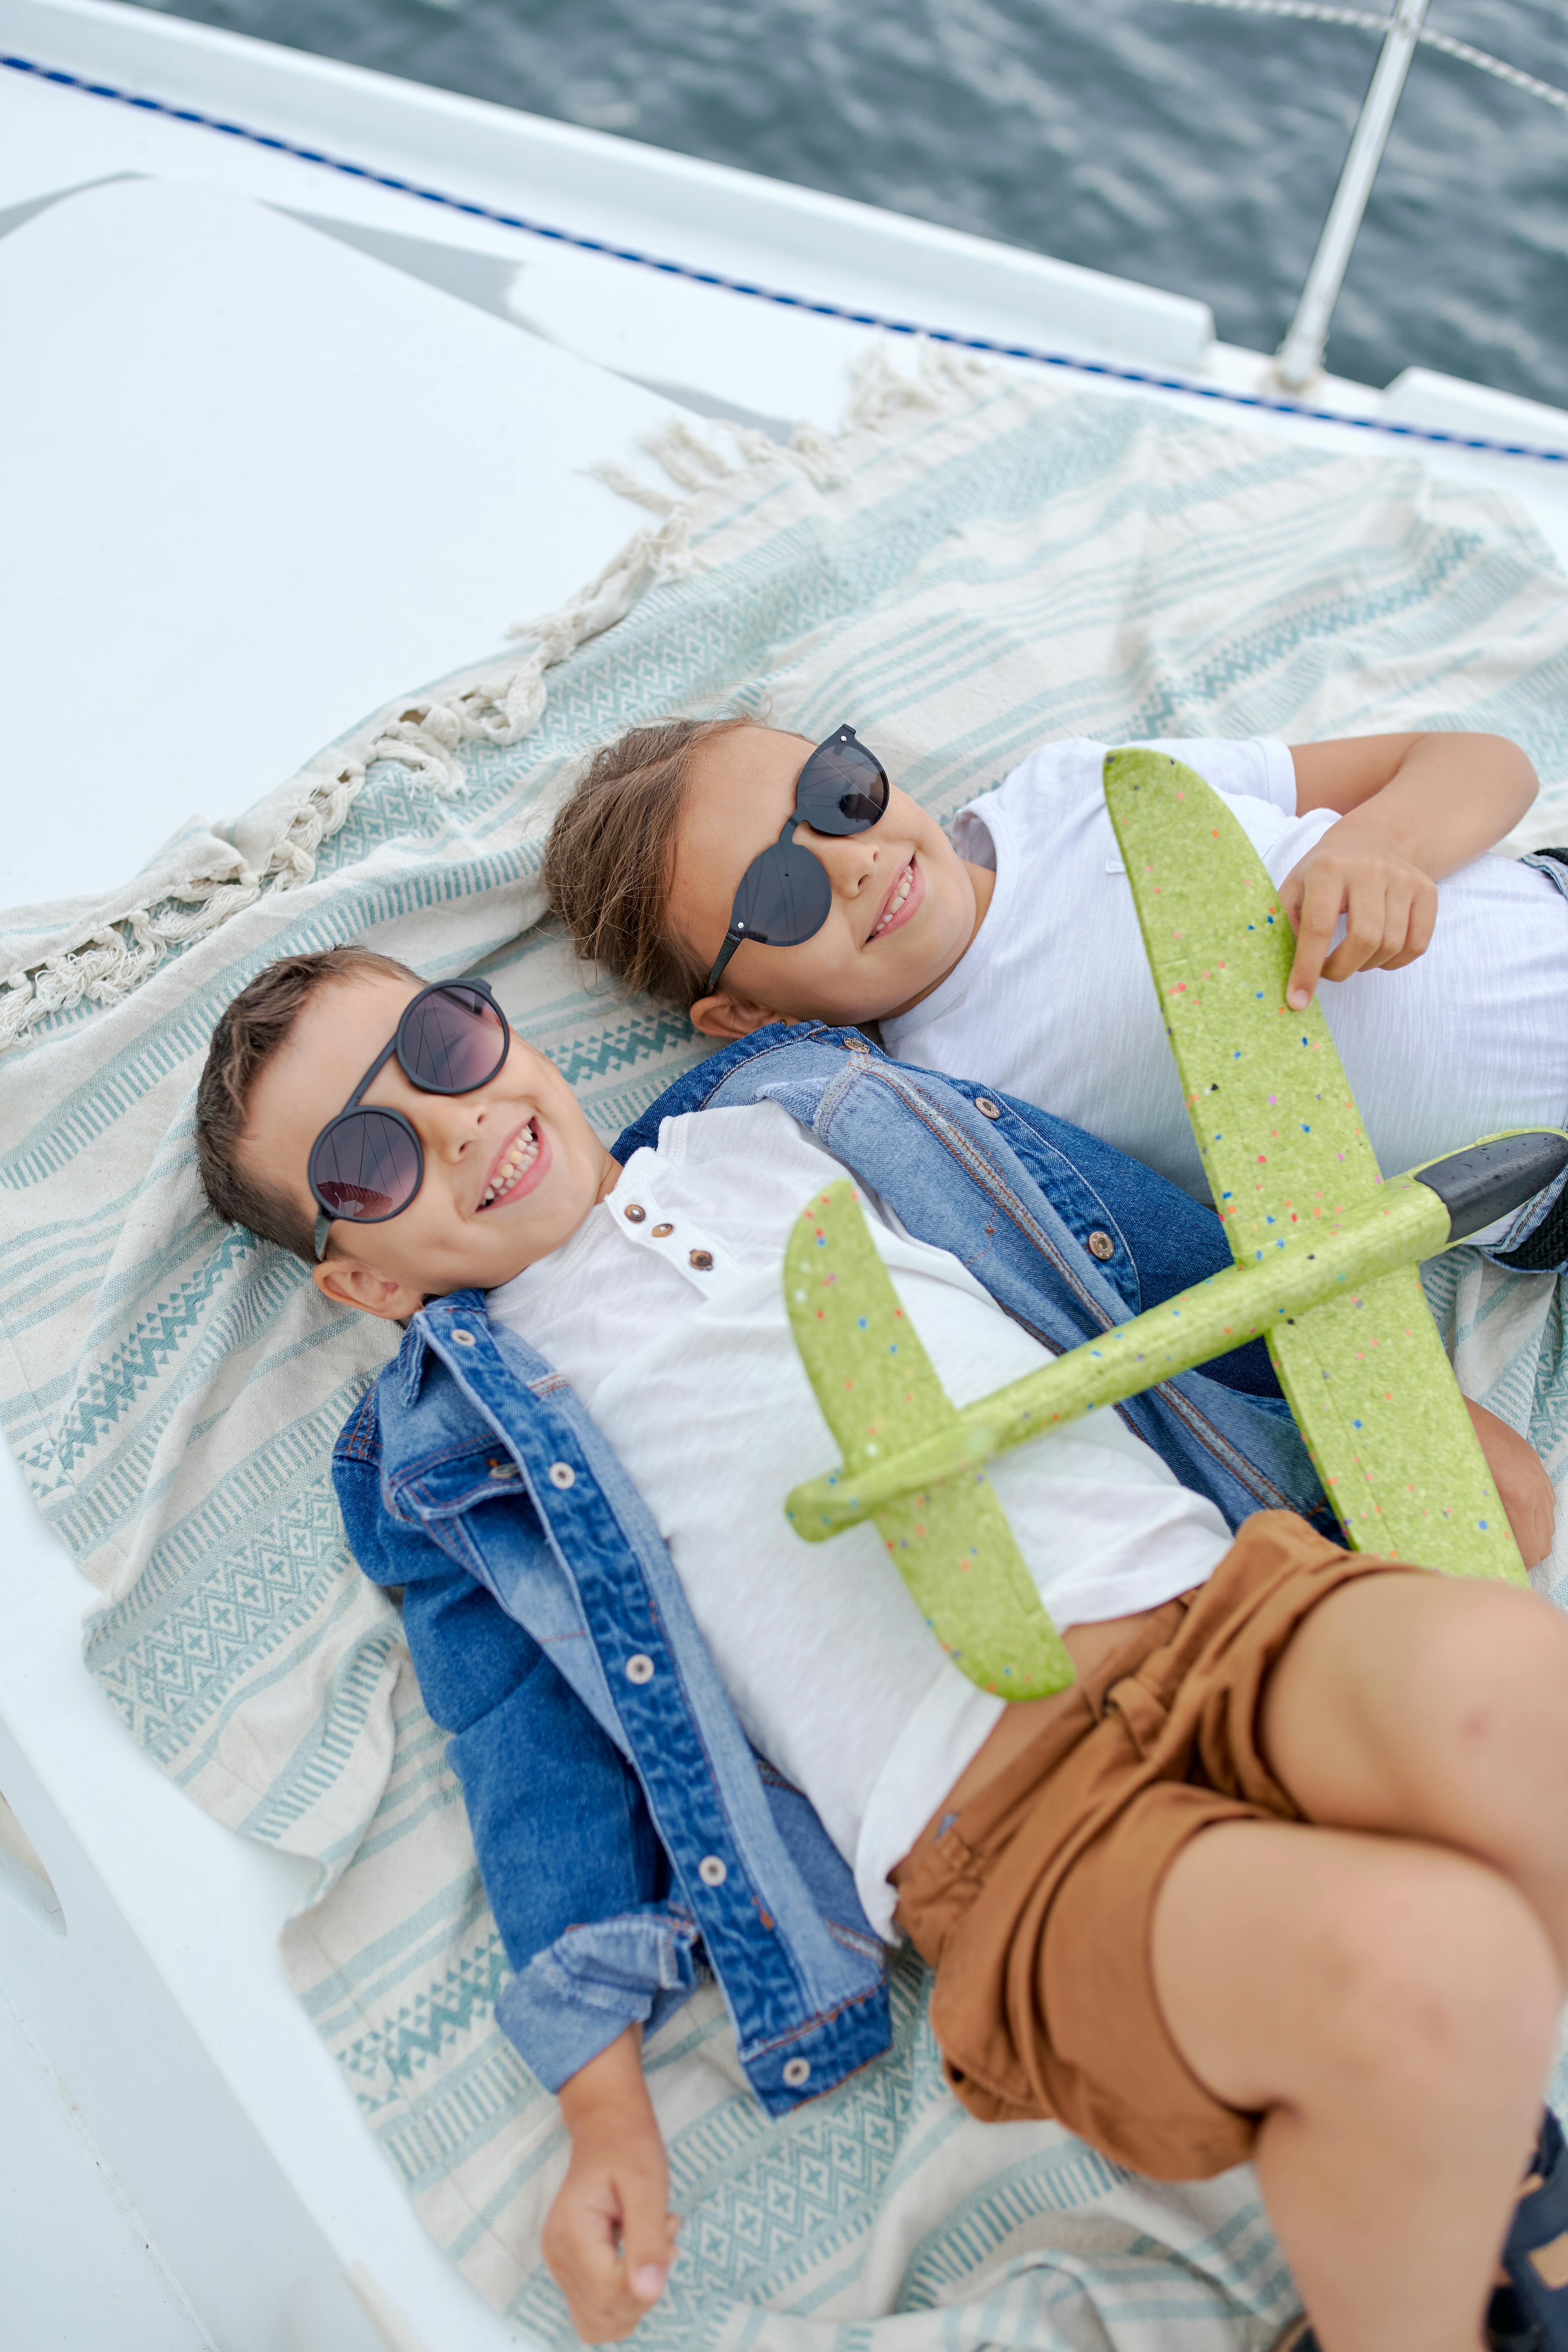 Two happy children lying facing up on a boat playing with a toy plane | Source: Pexels